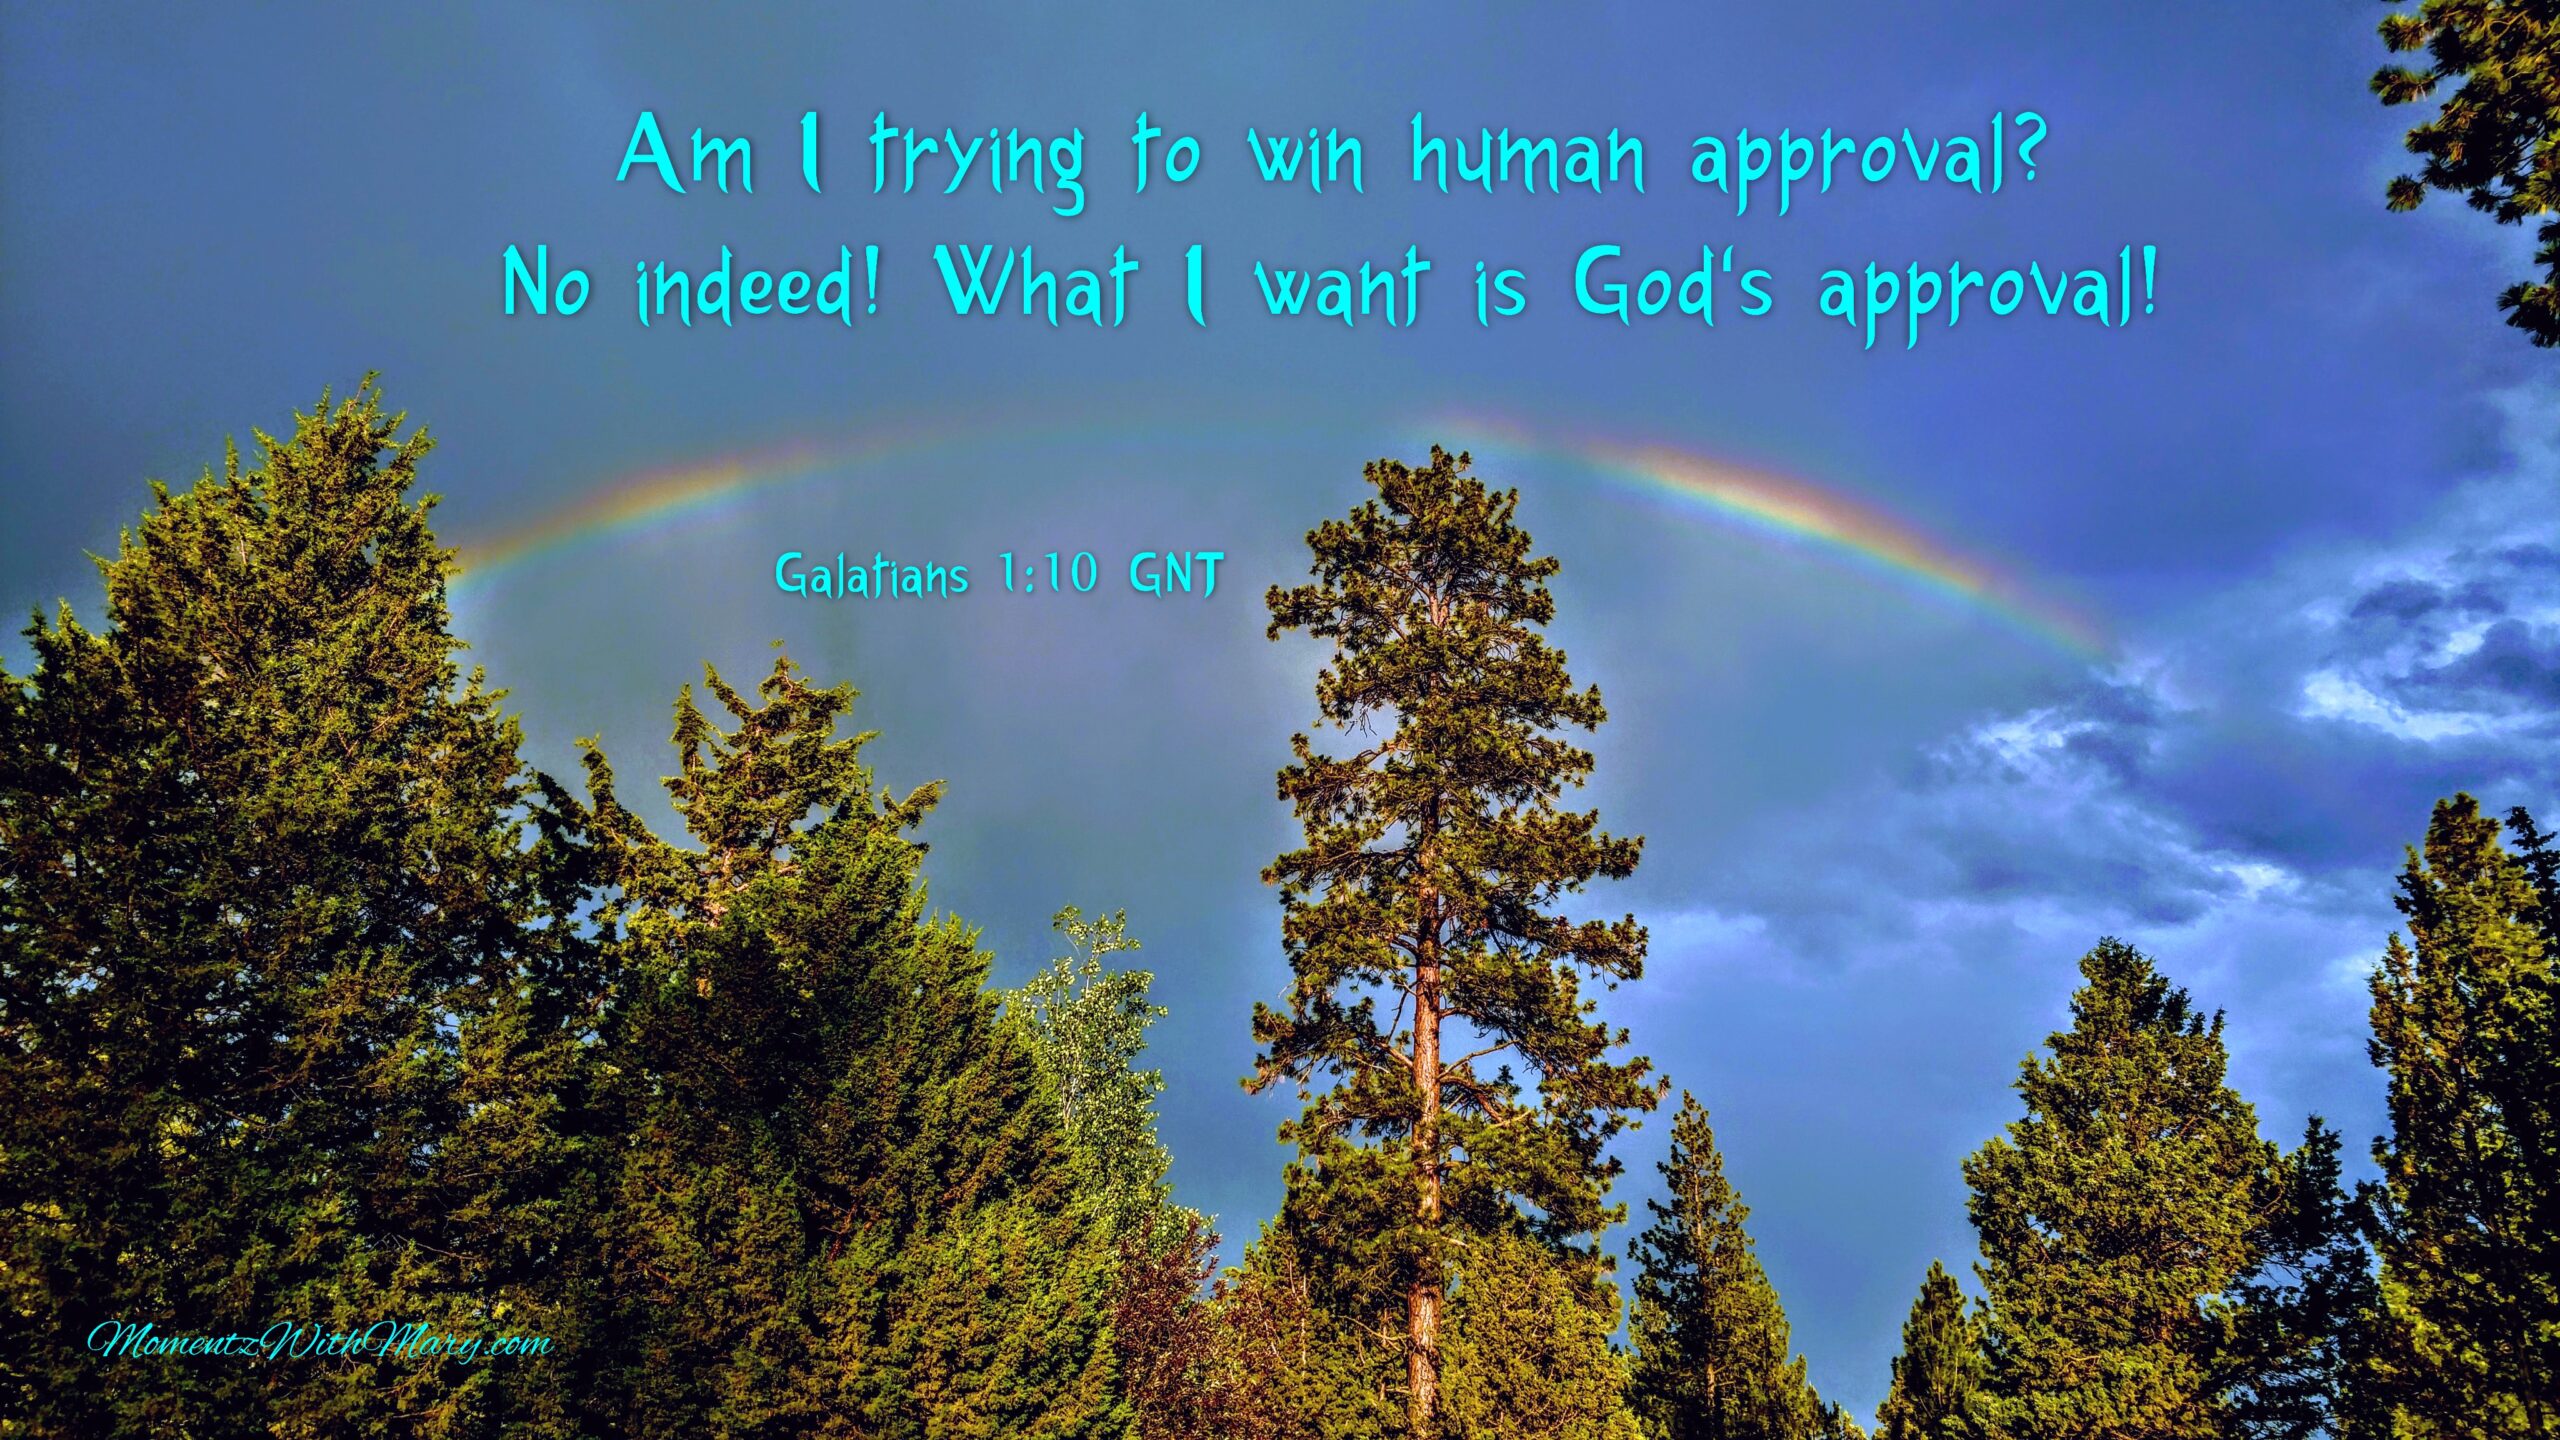 Rainbow in dark blue cloudy sky above tall green pine trees. Am I trying to win human approval? No indeed! What I want is God's approval! Galatians 1:10